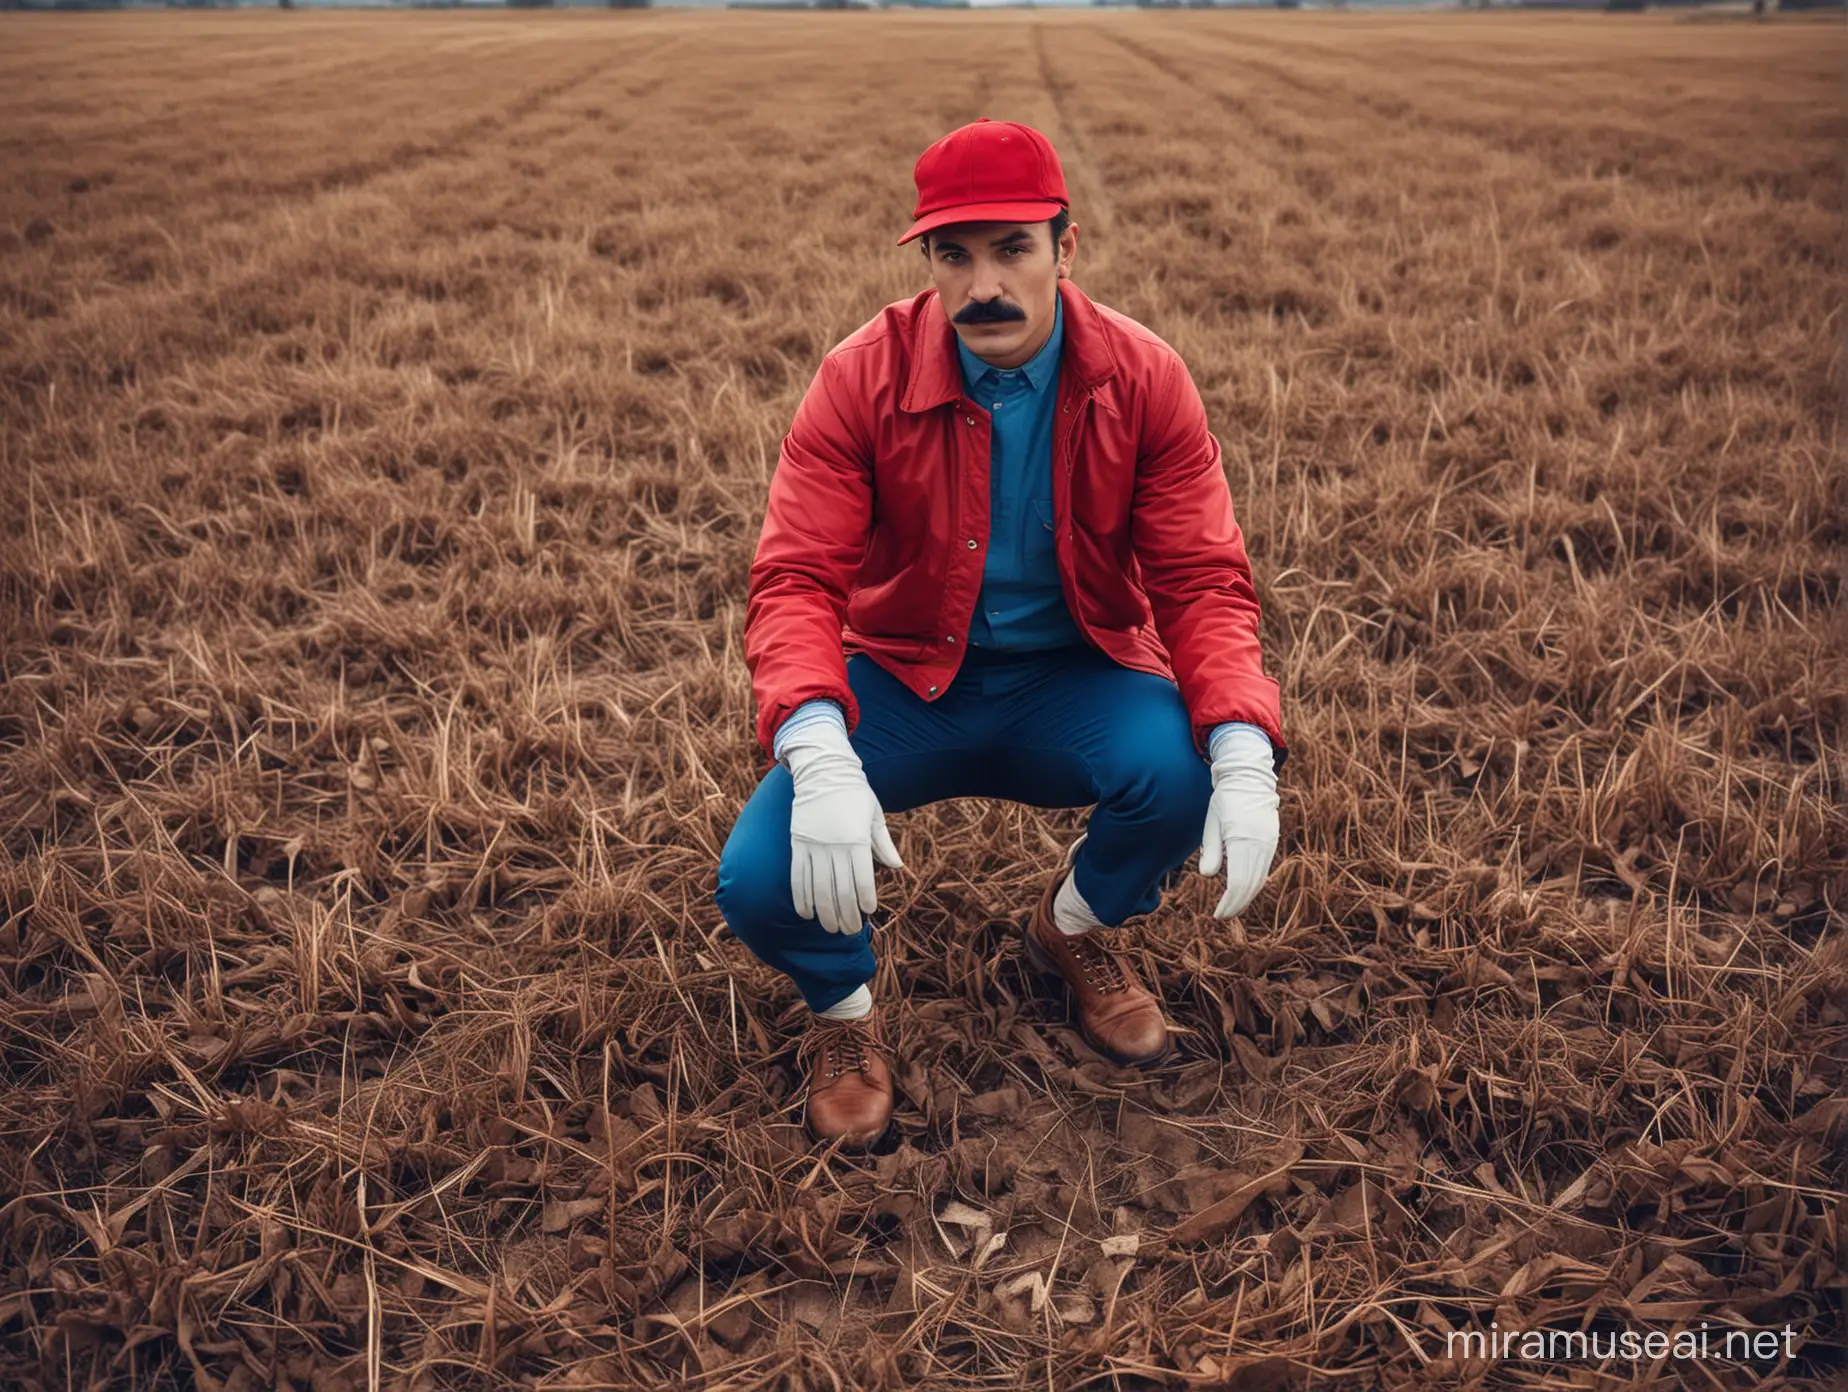 man with black mustache, red cap, red jacket open, blue shirt, blue pants, brown shoes, and white gloves, in a field, cinematic art